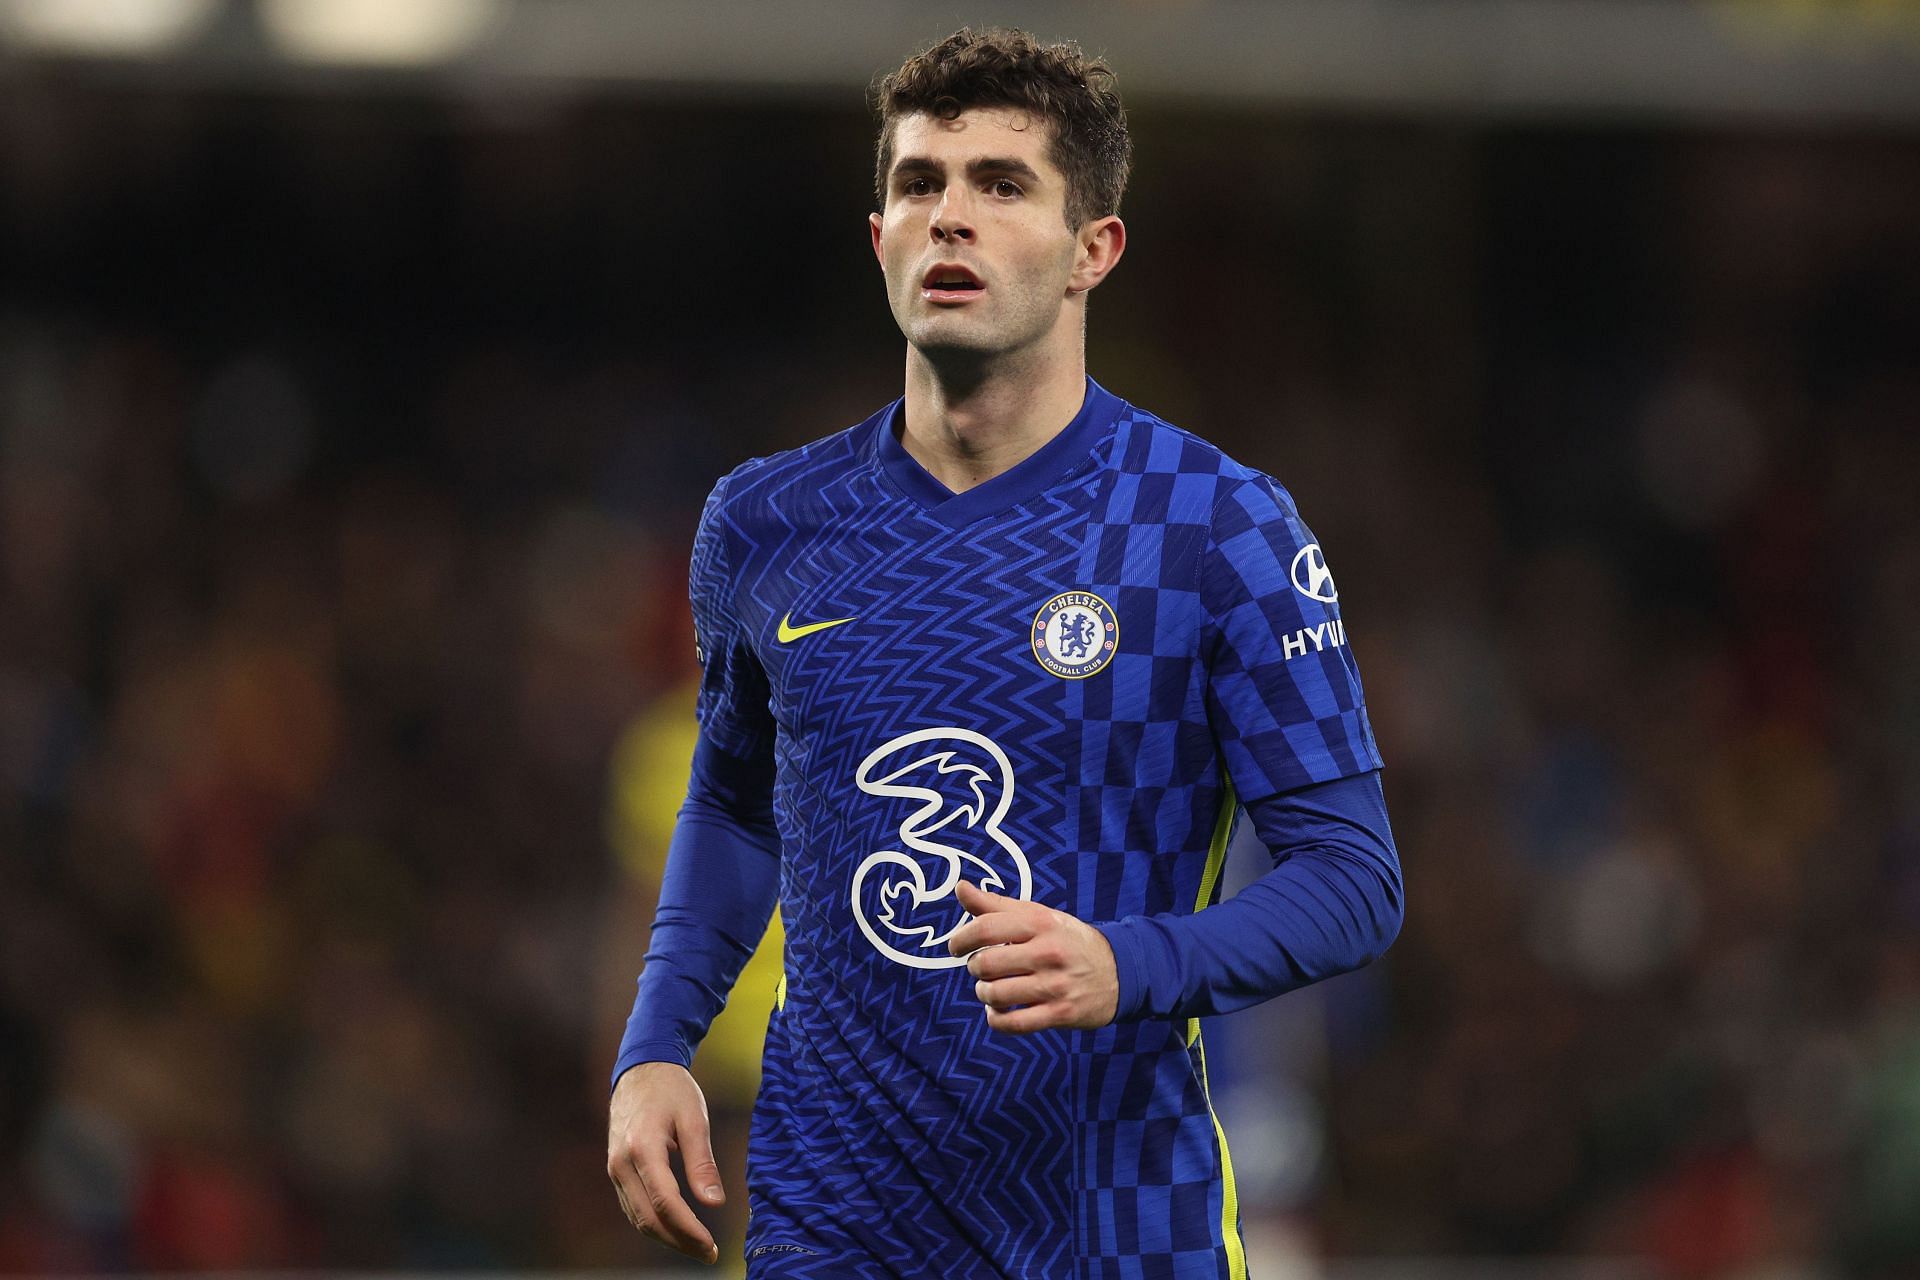 Christian Pulisic has scored 25 goals for Chelsea.